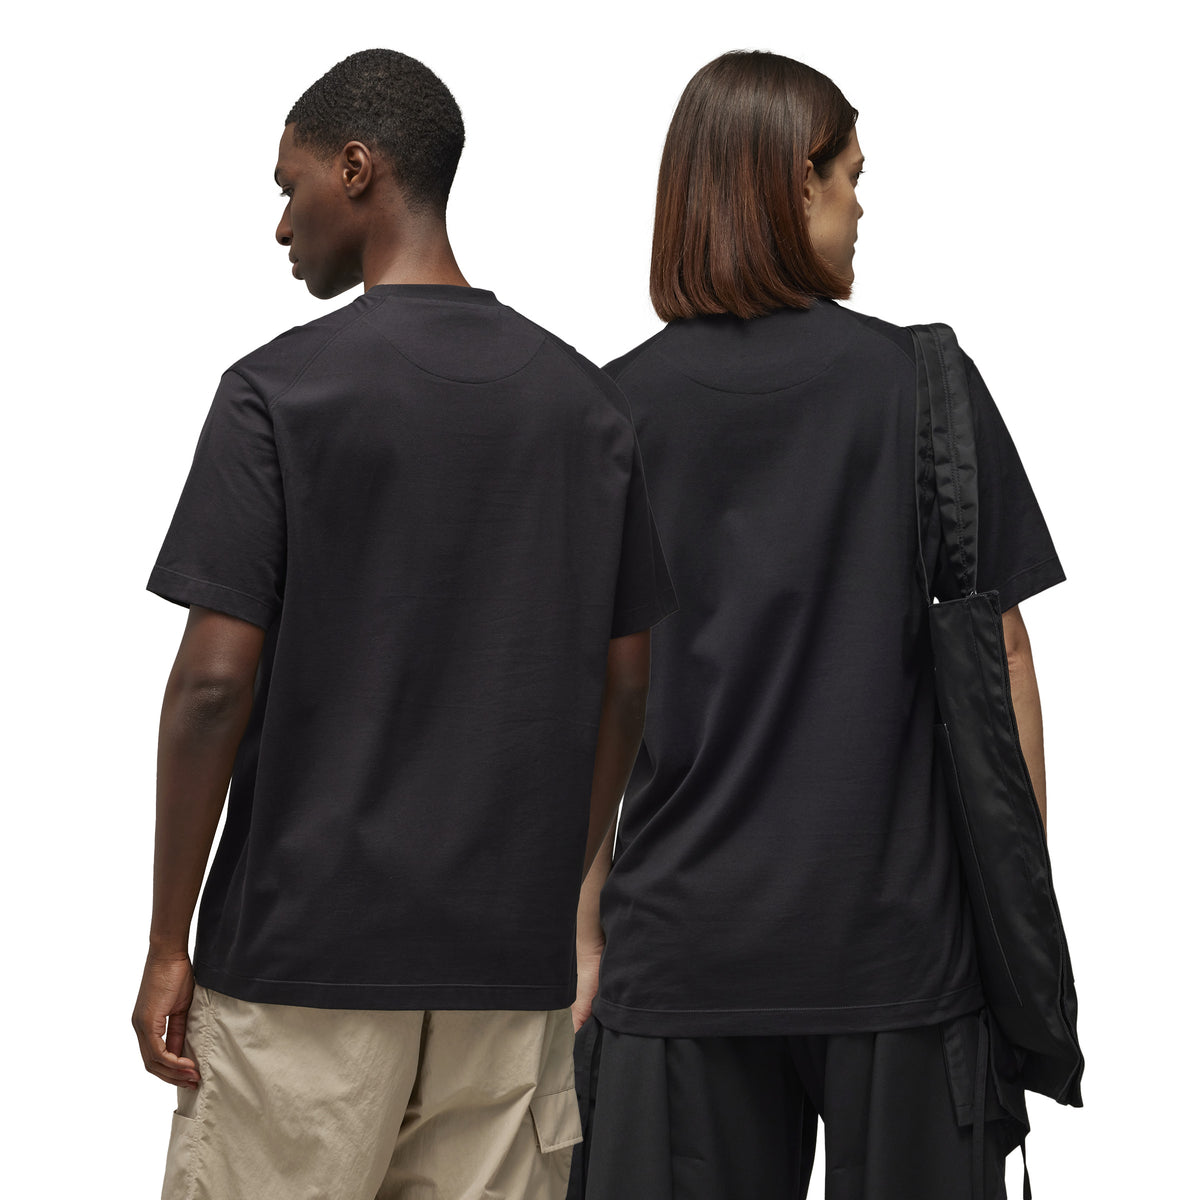 Y-3 Relaxed S/S Tee - Black